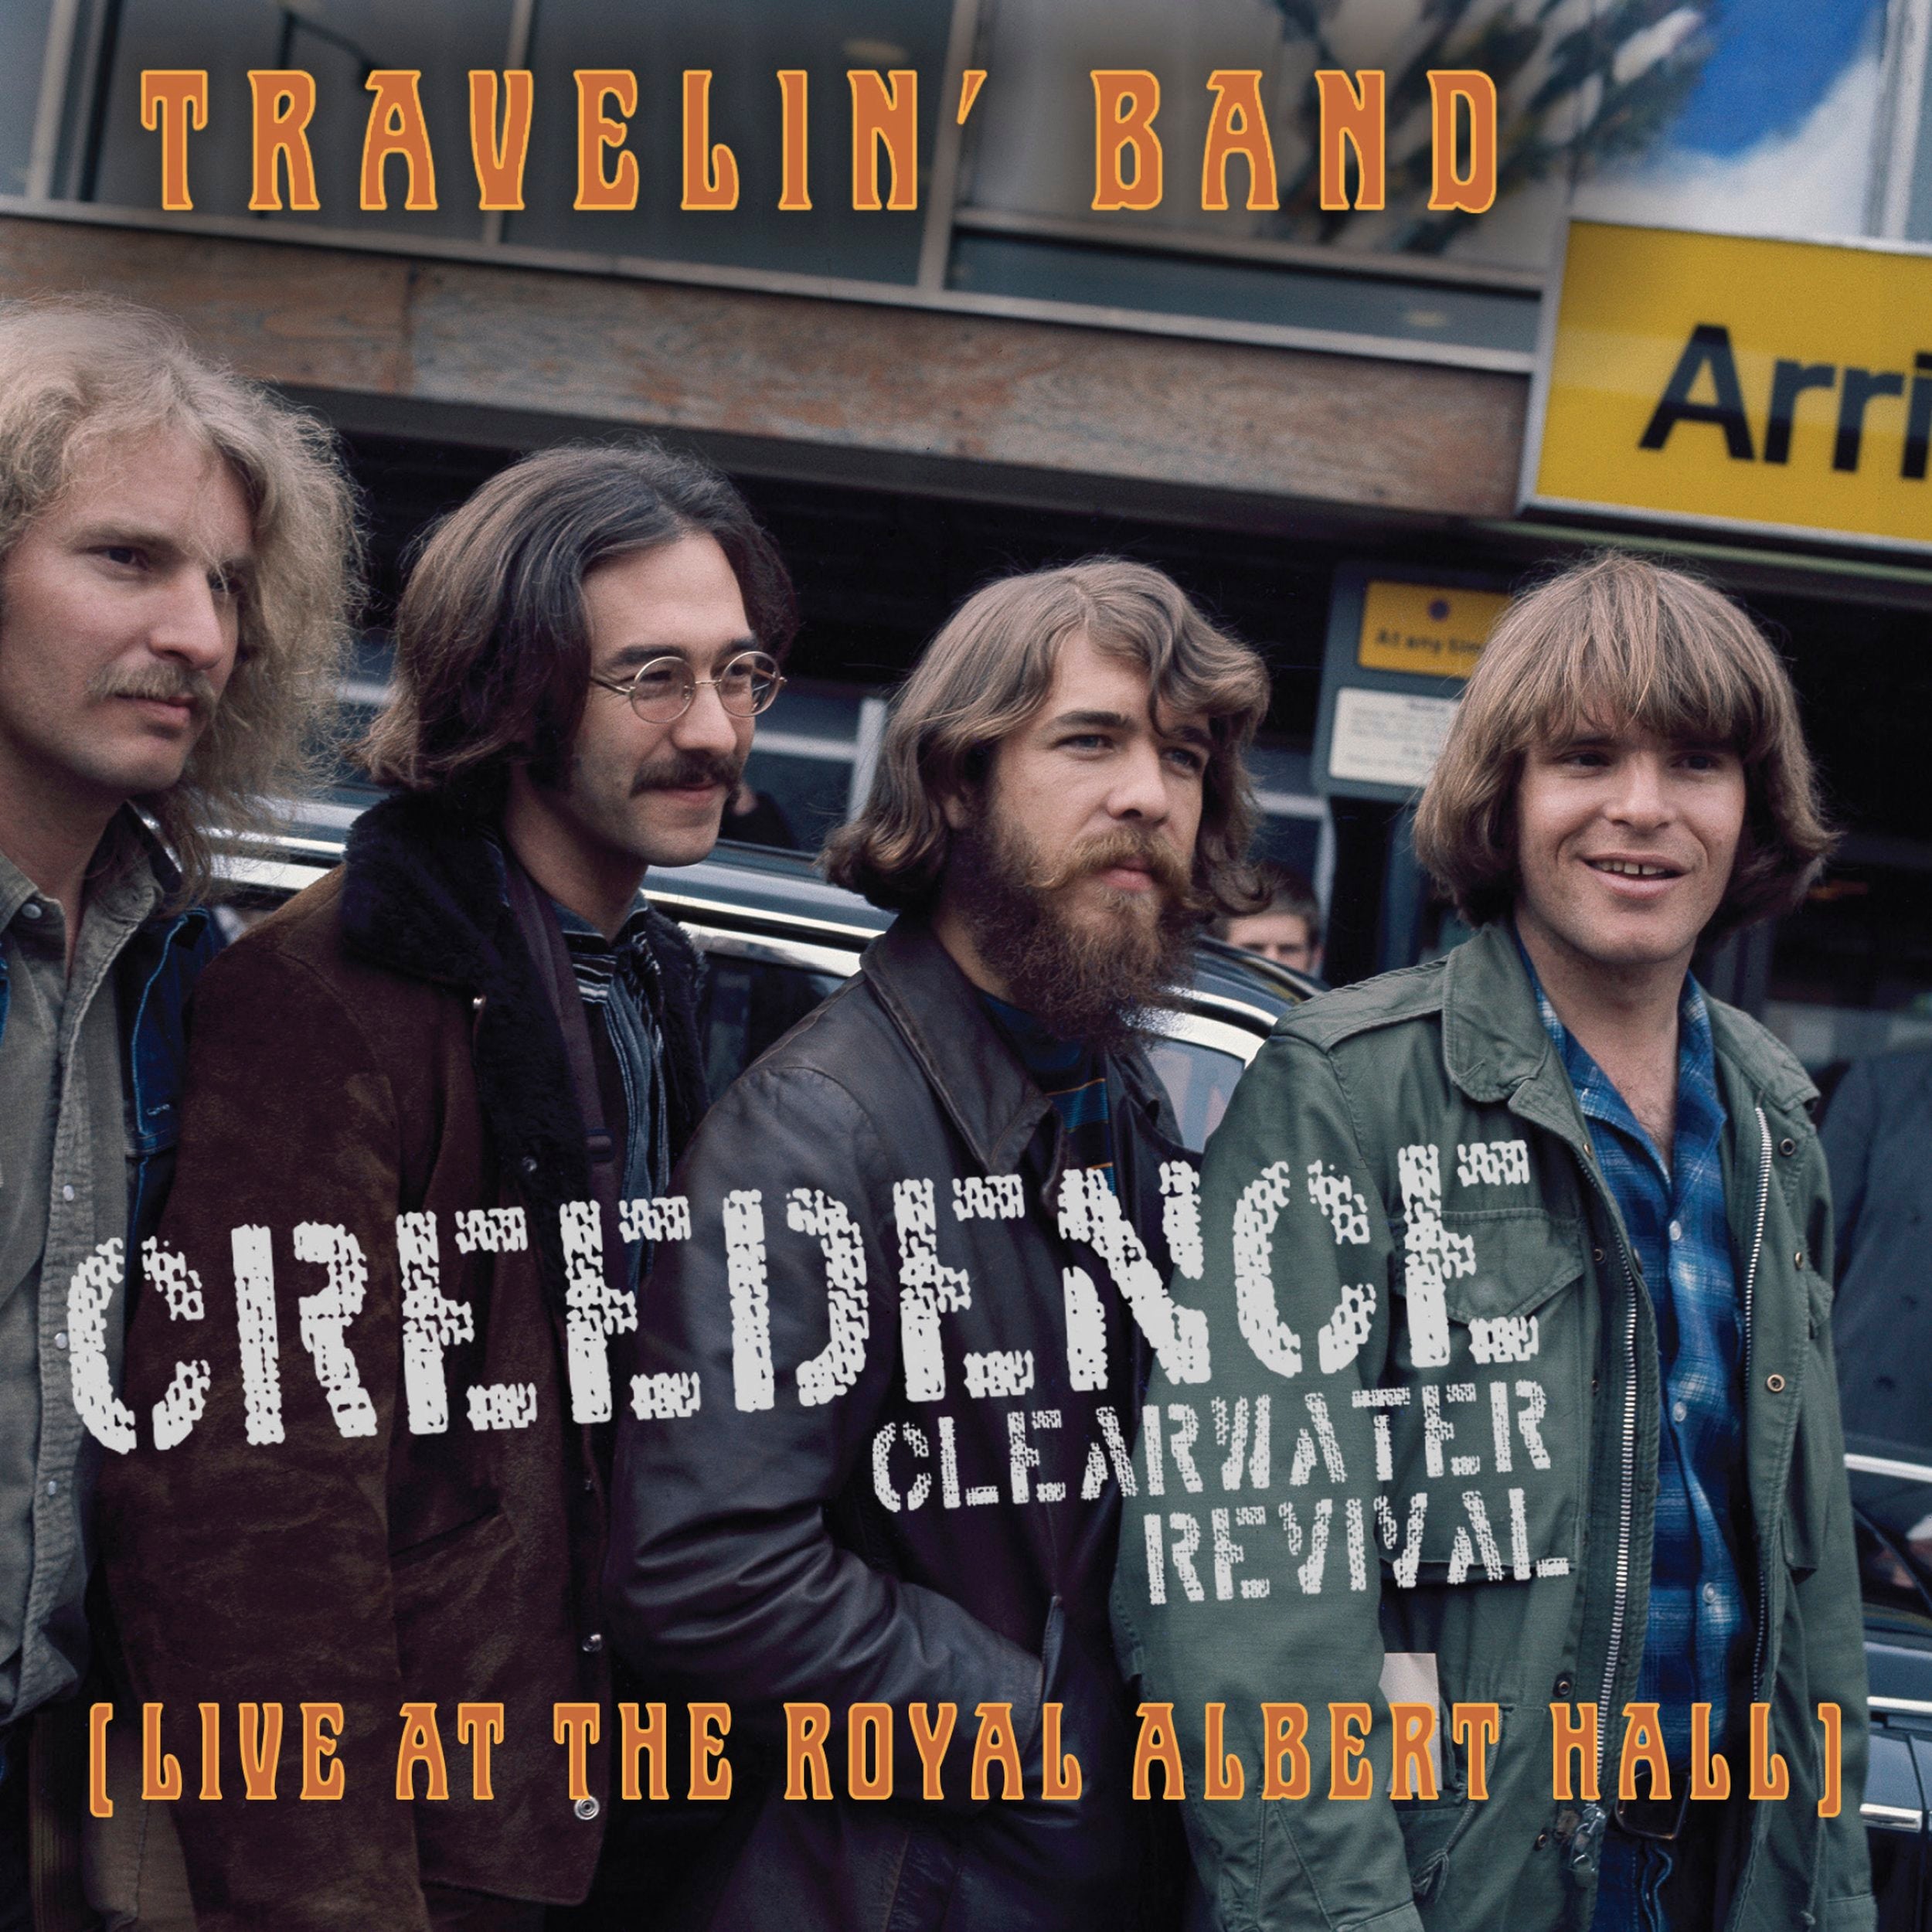 Creedence Clearwater Revival "Traveling Band [Live At The Royal Albert Hall]" 7"